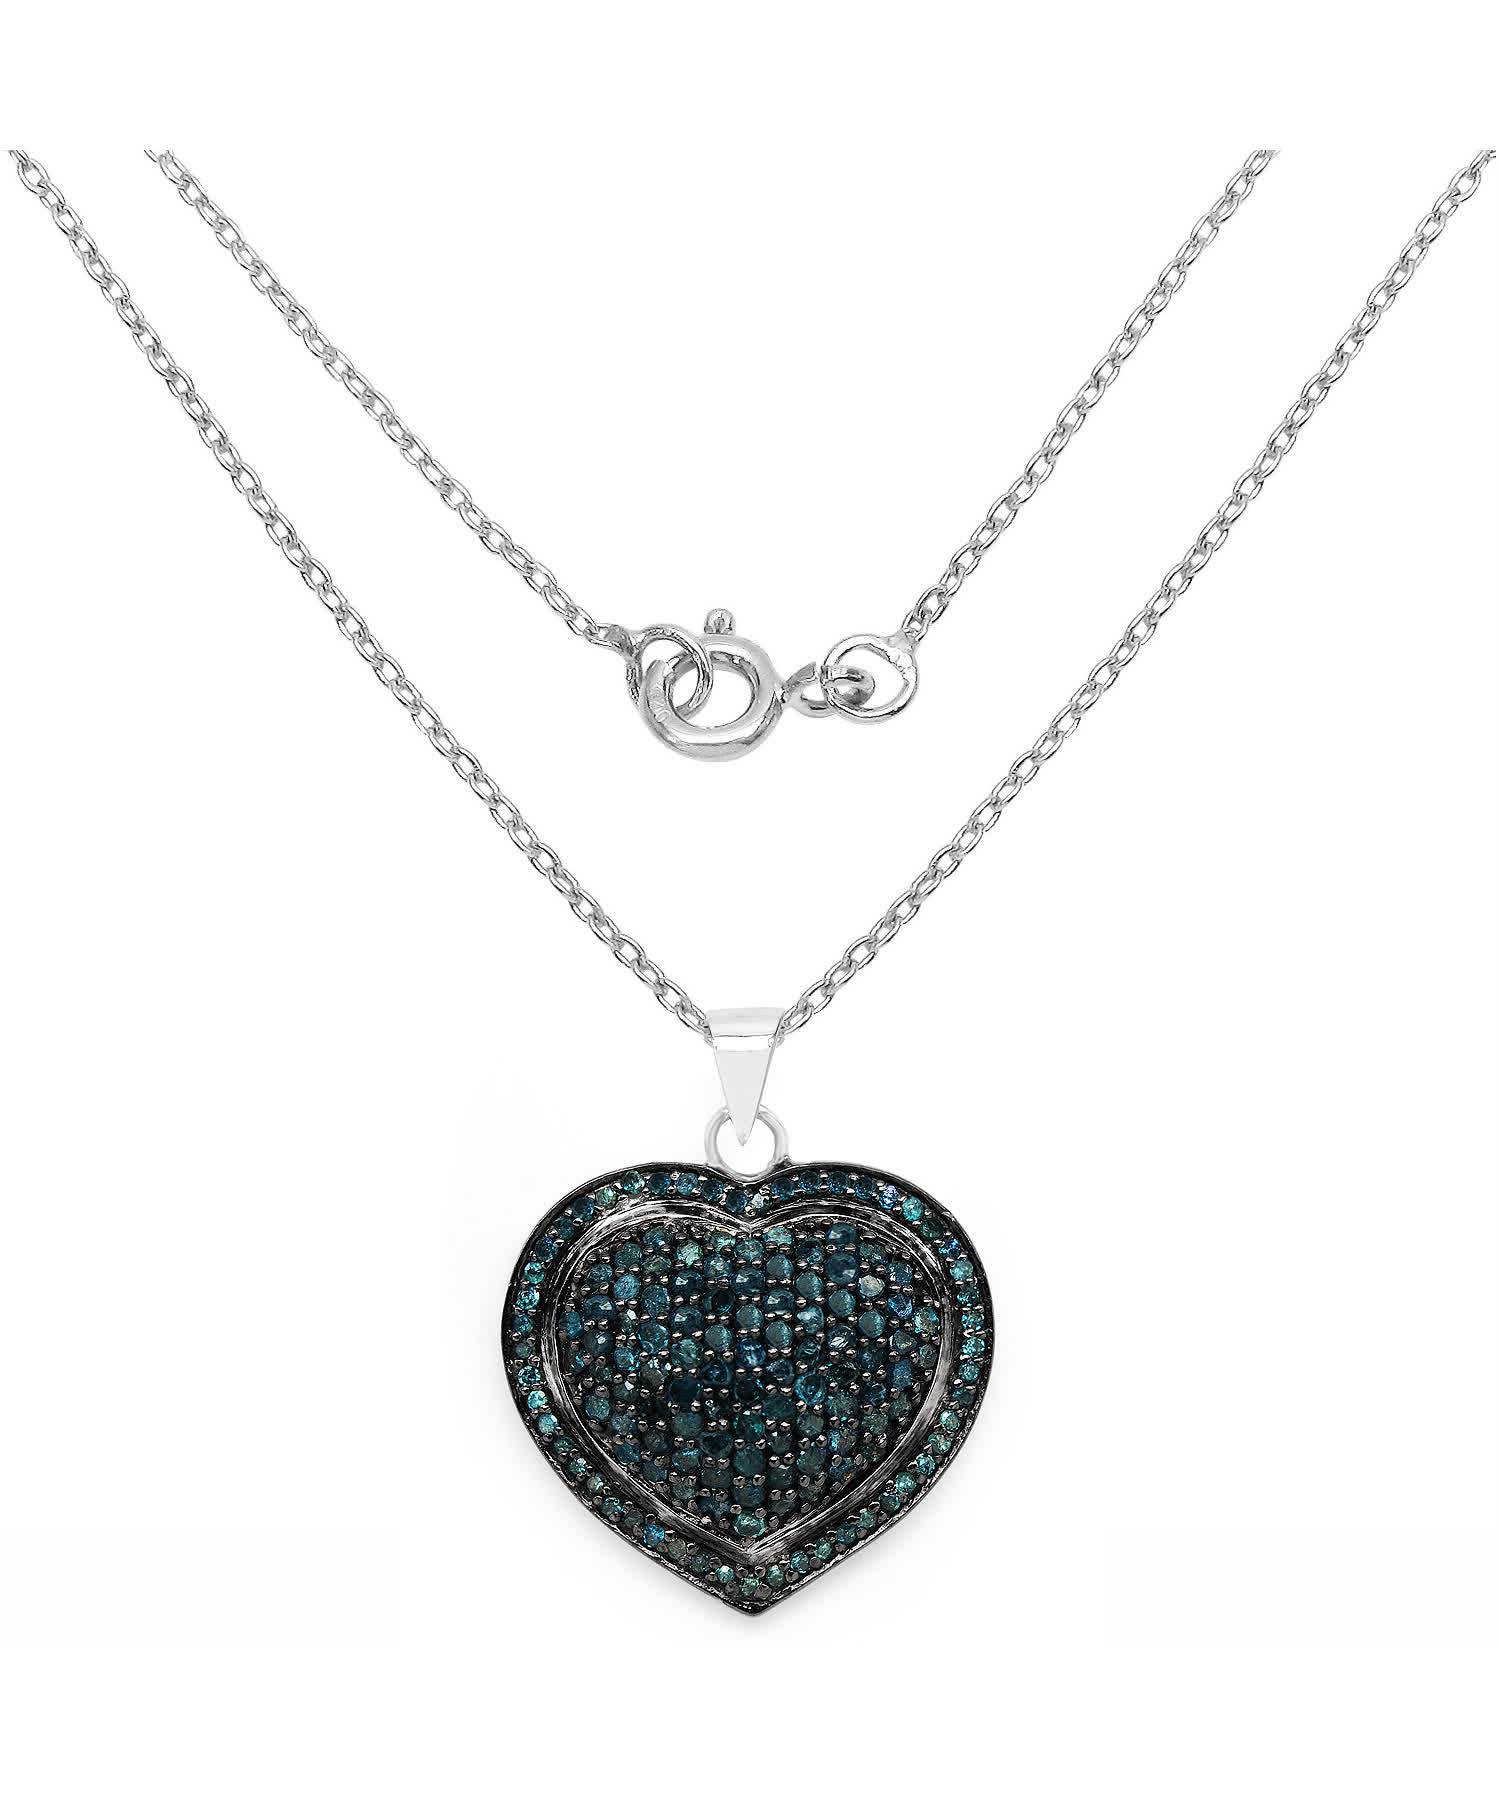 1.25ctw Fancy Blue Diamond Rhodium Plated 925 Sterling Silver Heart Pendant With Chain View 2